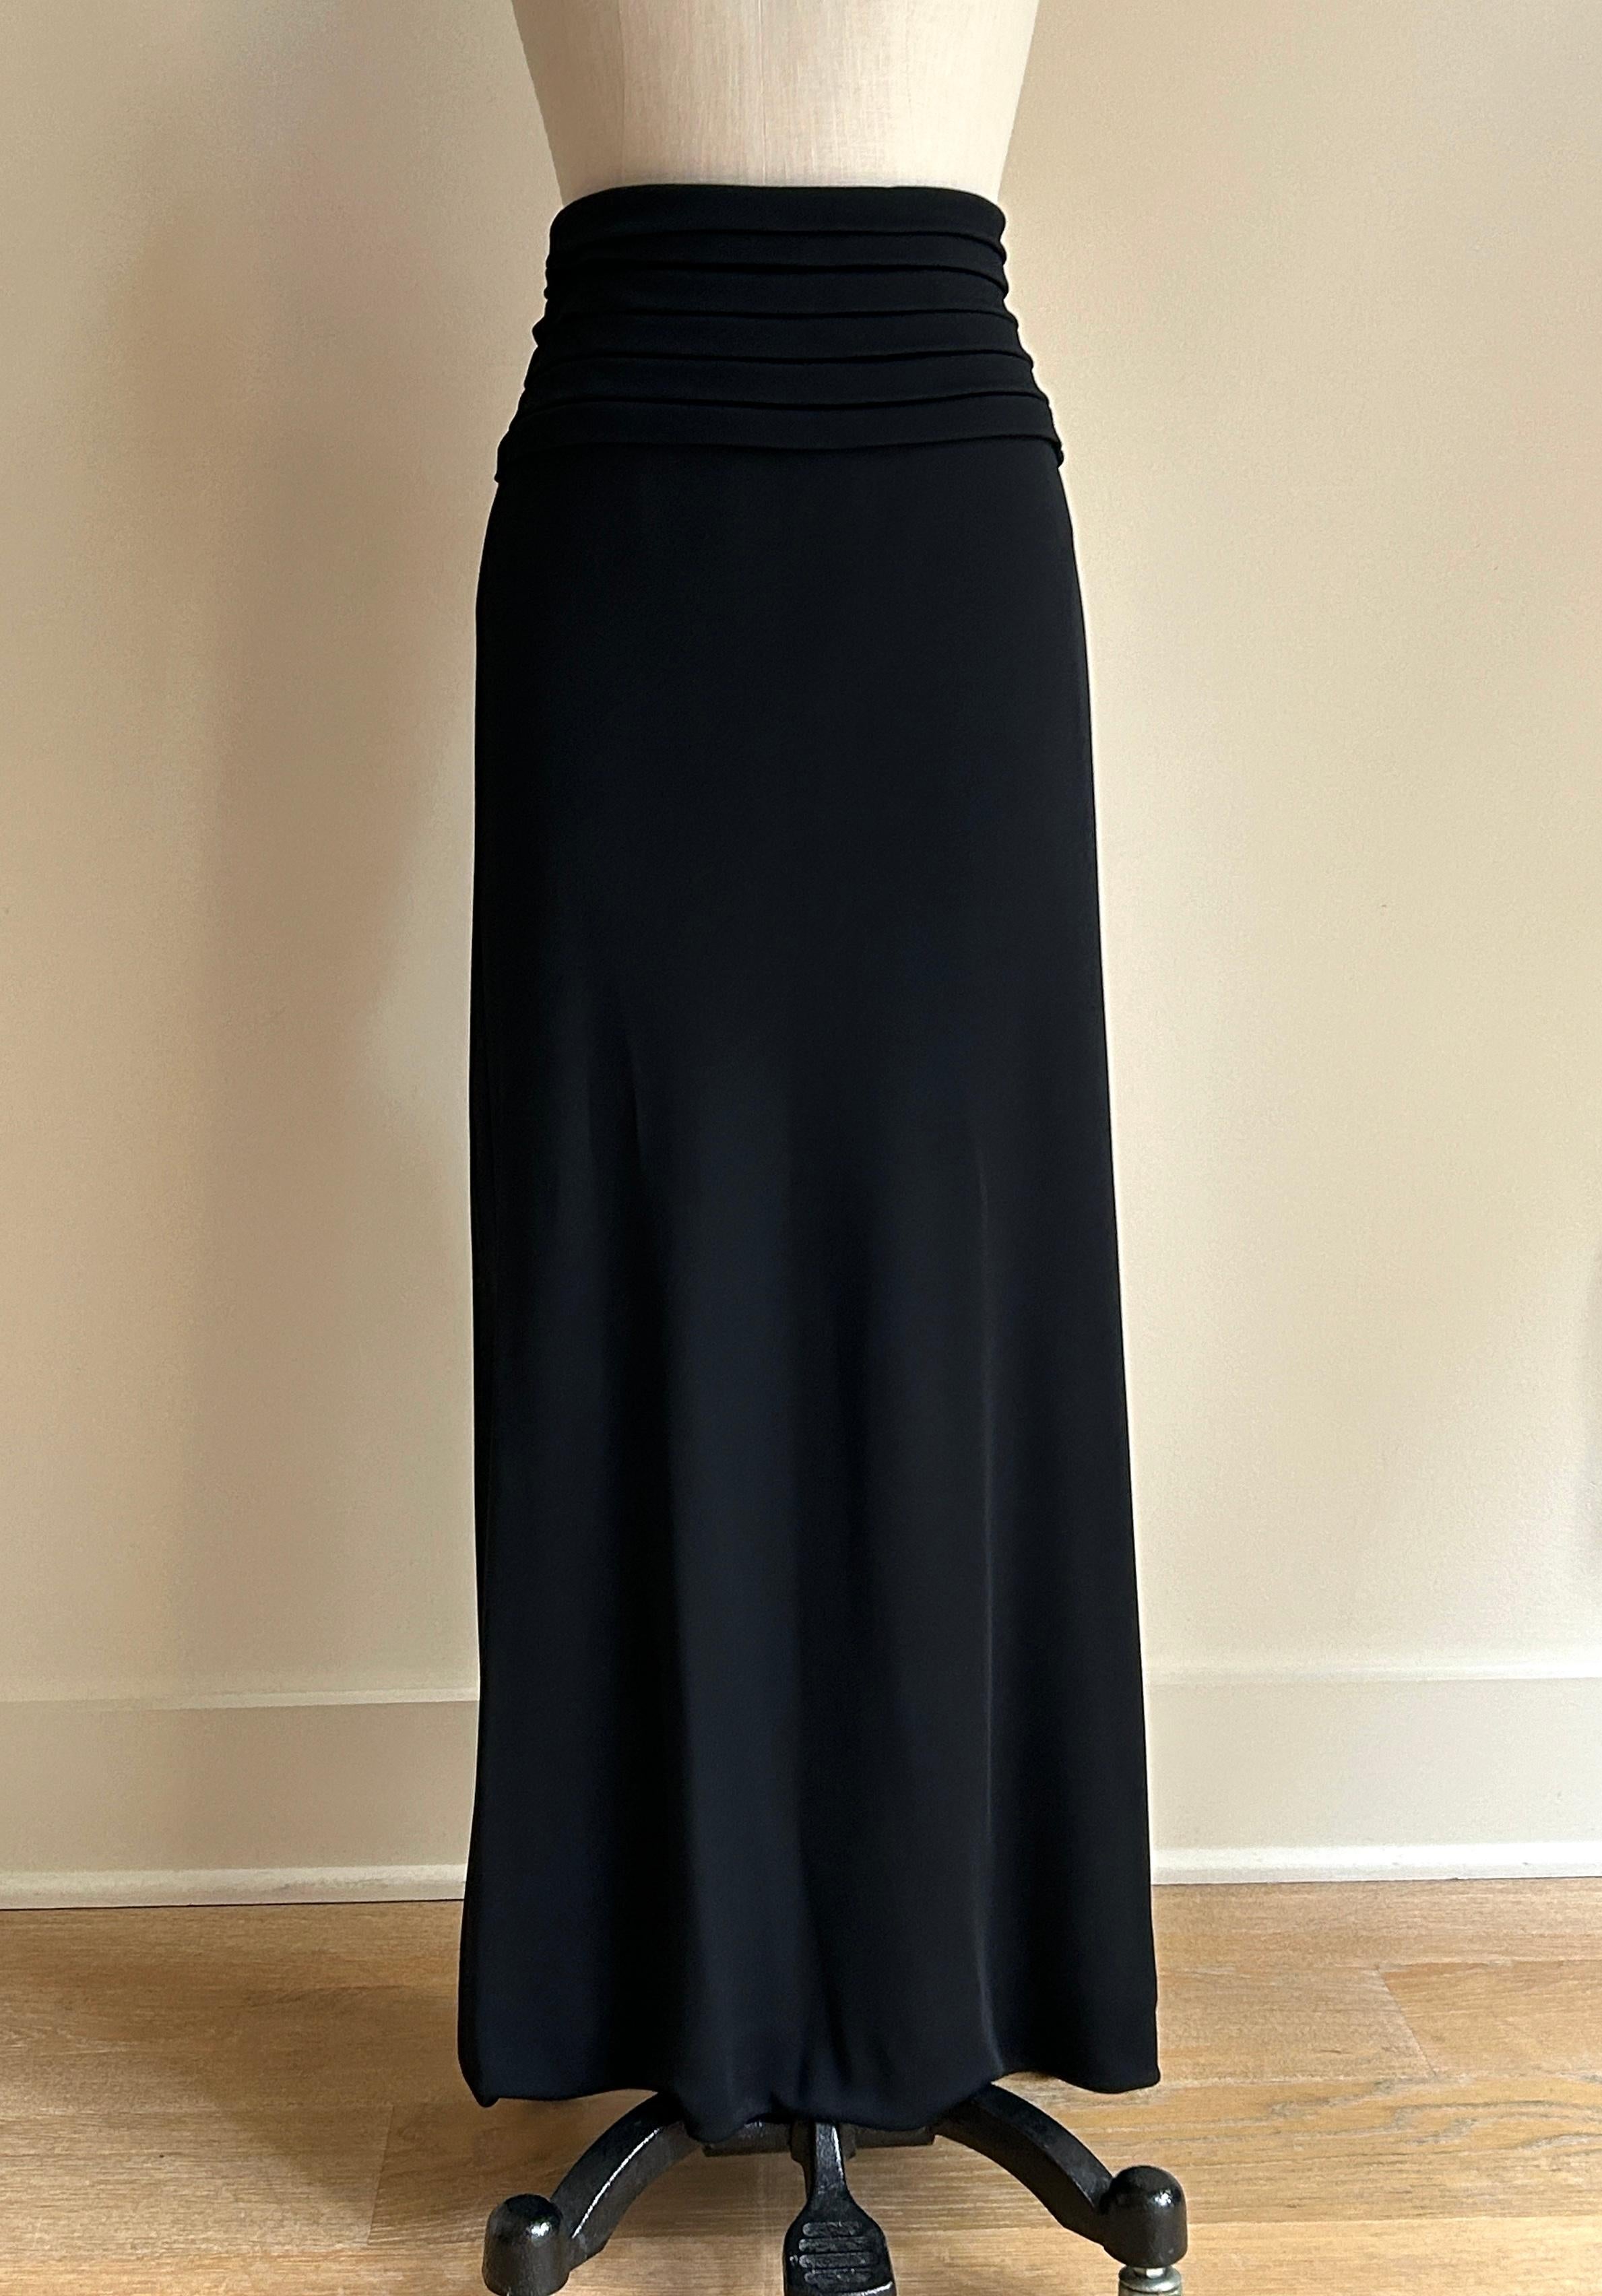 Unworn vintage 1990s Giorgio Armani black lightweight jersey knit straight skirt that hits just between a midi and maxi length. Stacked horizontal pleats at waist. Side zip and interior button. 

82% viscose, 18% polyamide. 
Fully lined in 82%